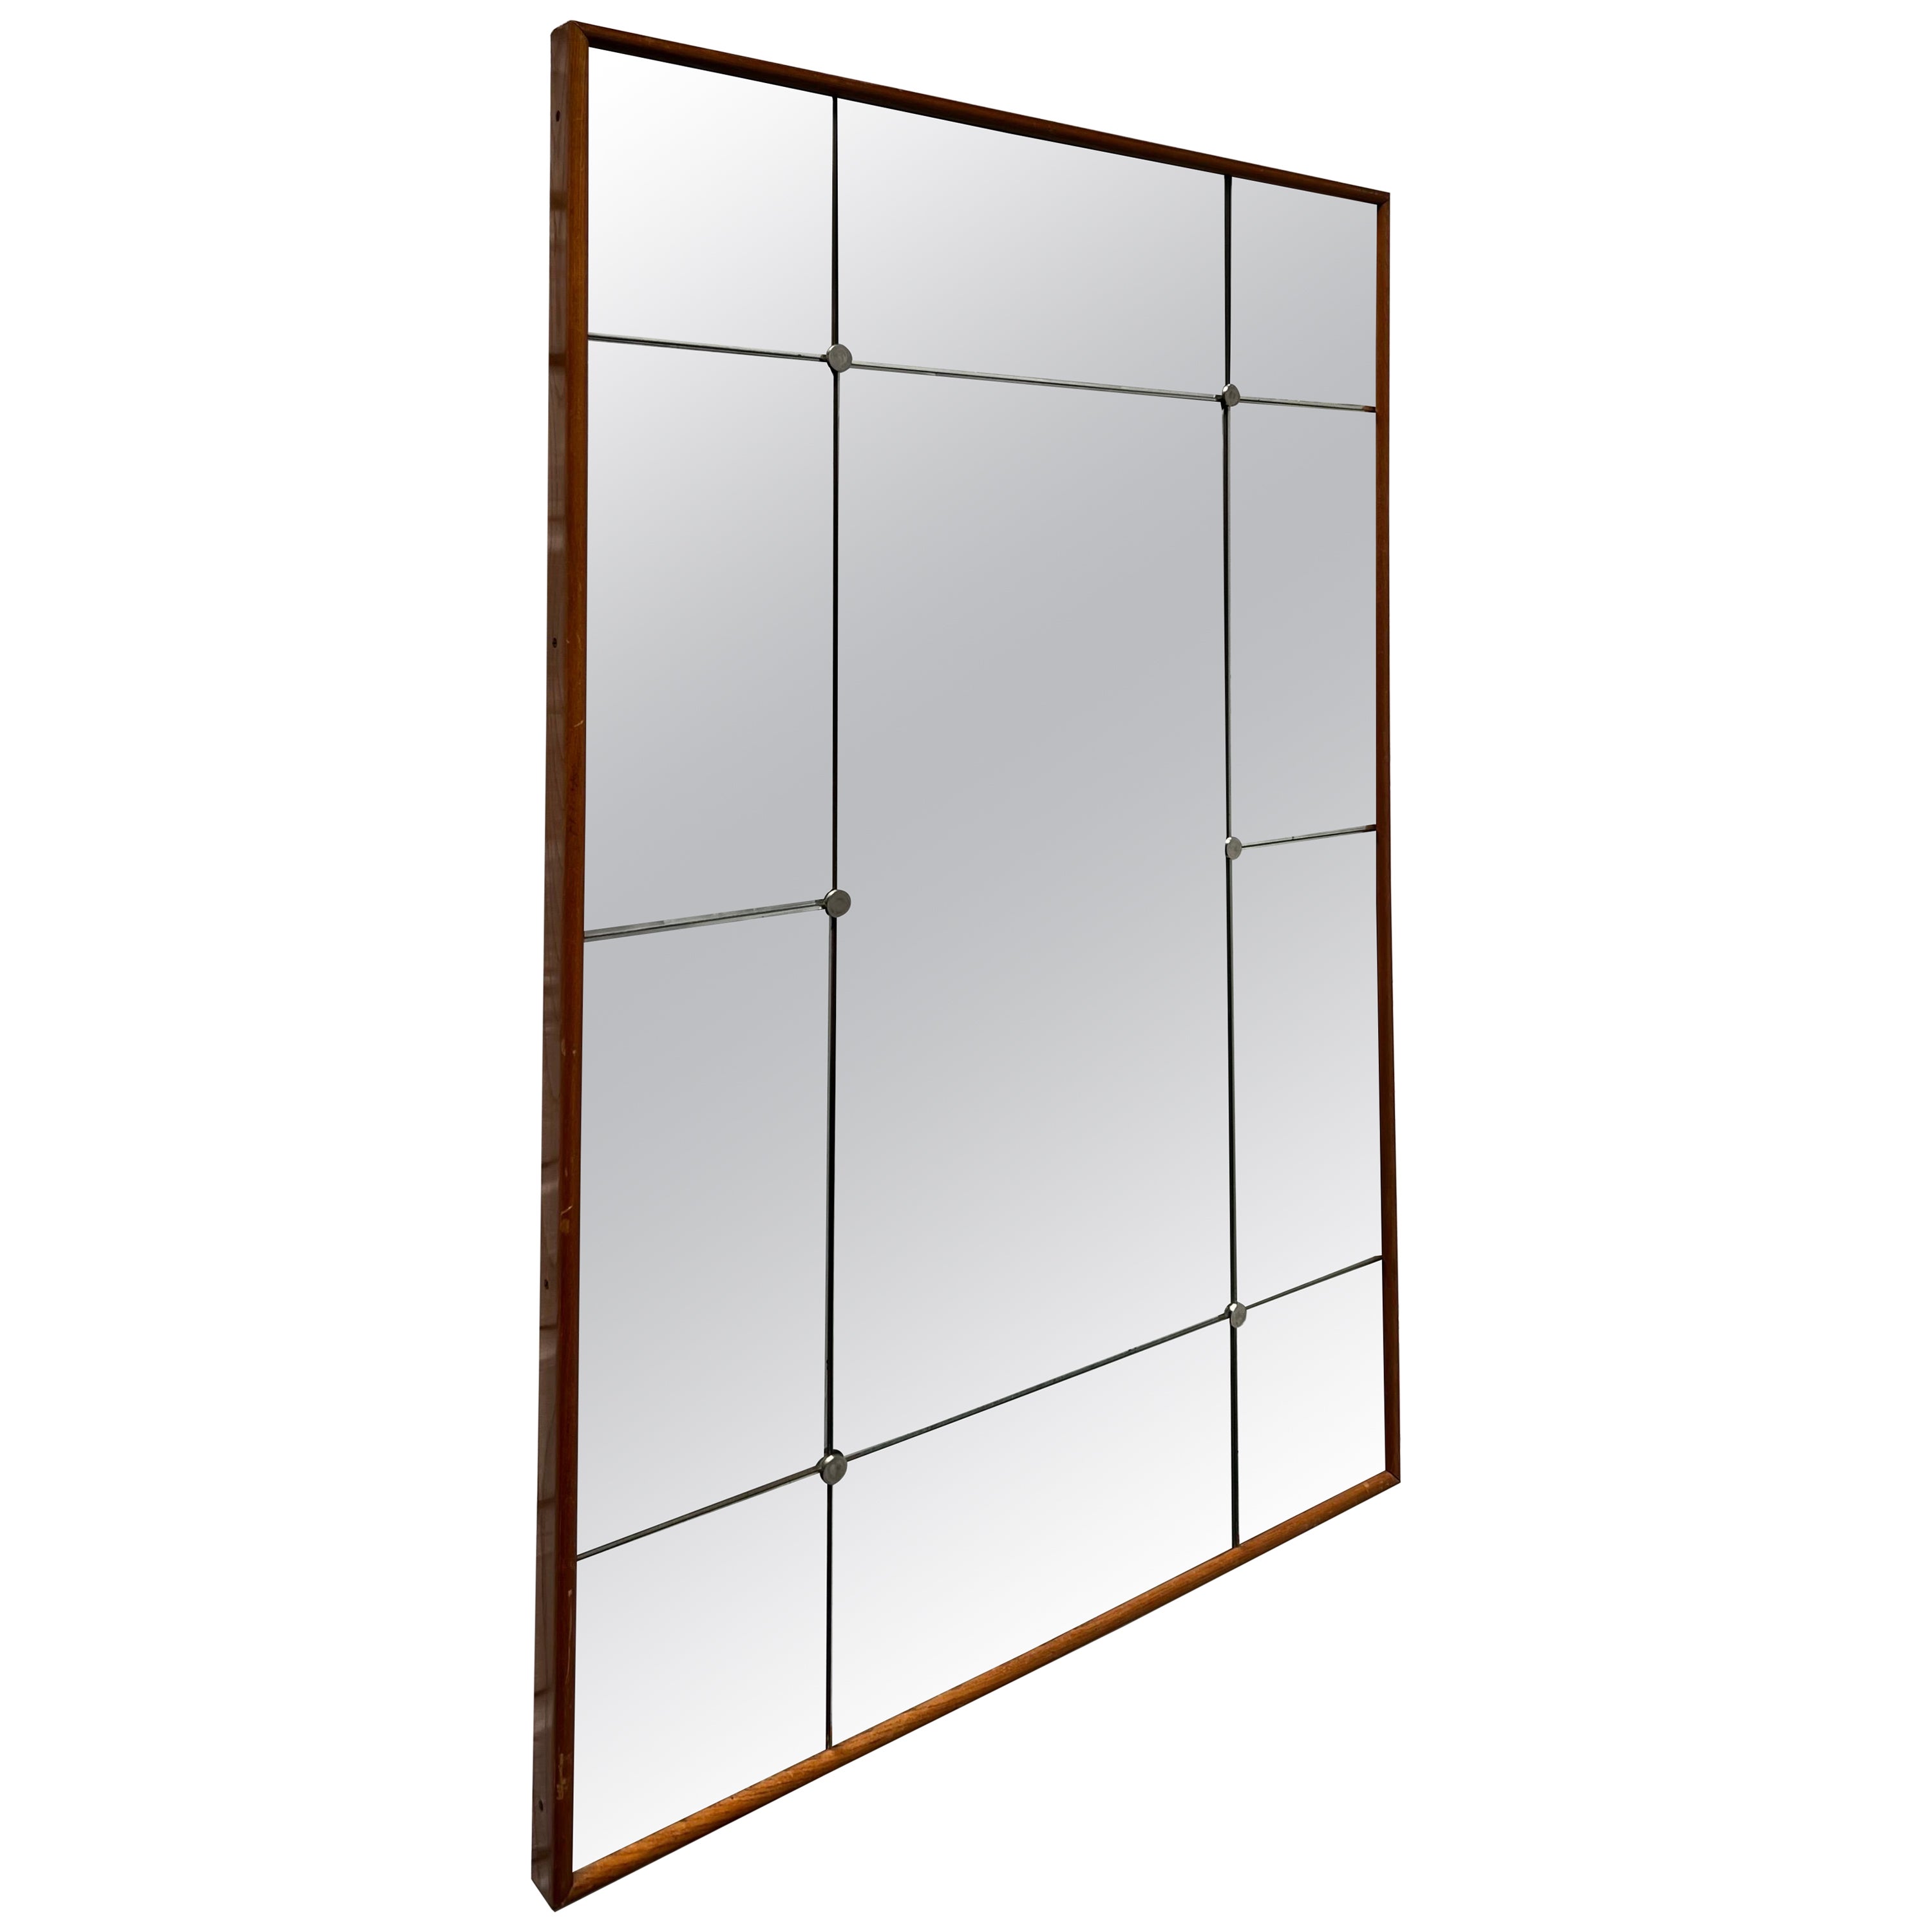 Classic Swedish pine 1940s Mirror with cut edge + metal joinery, 91.5 X 61.5 cm